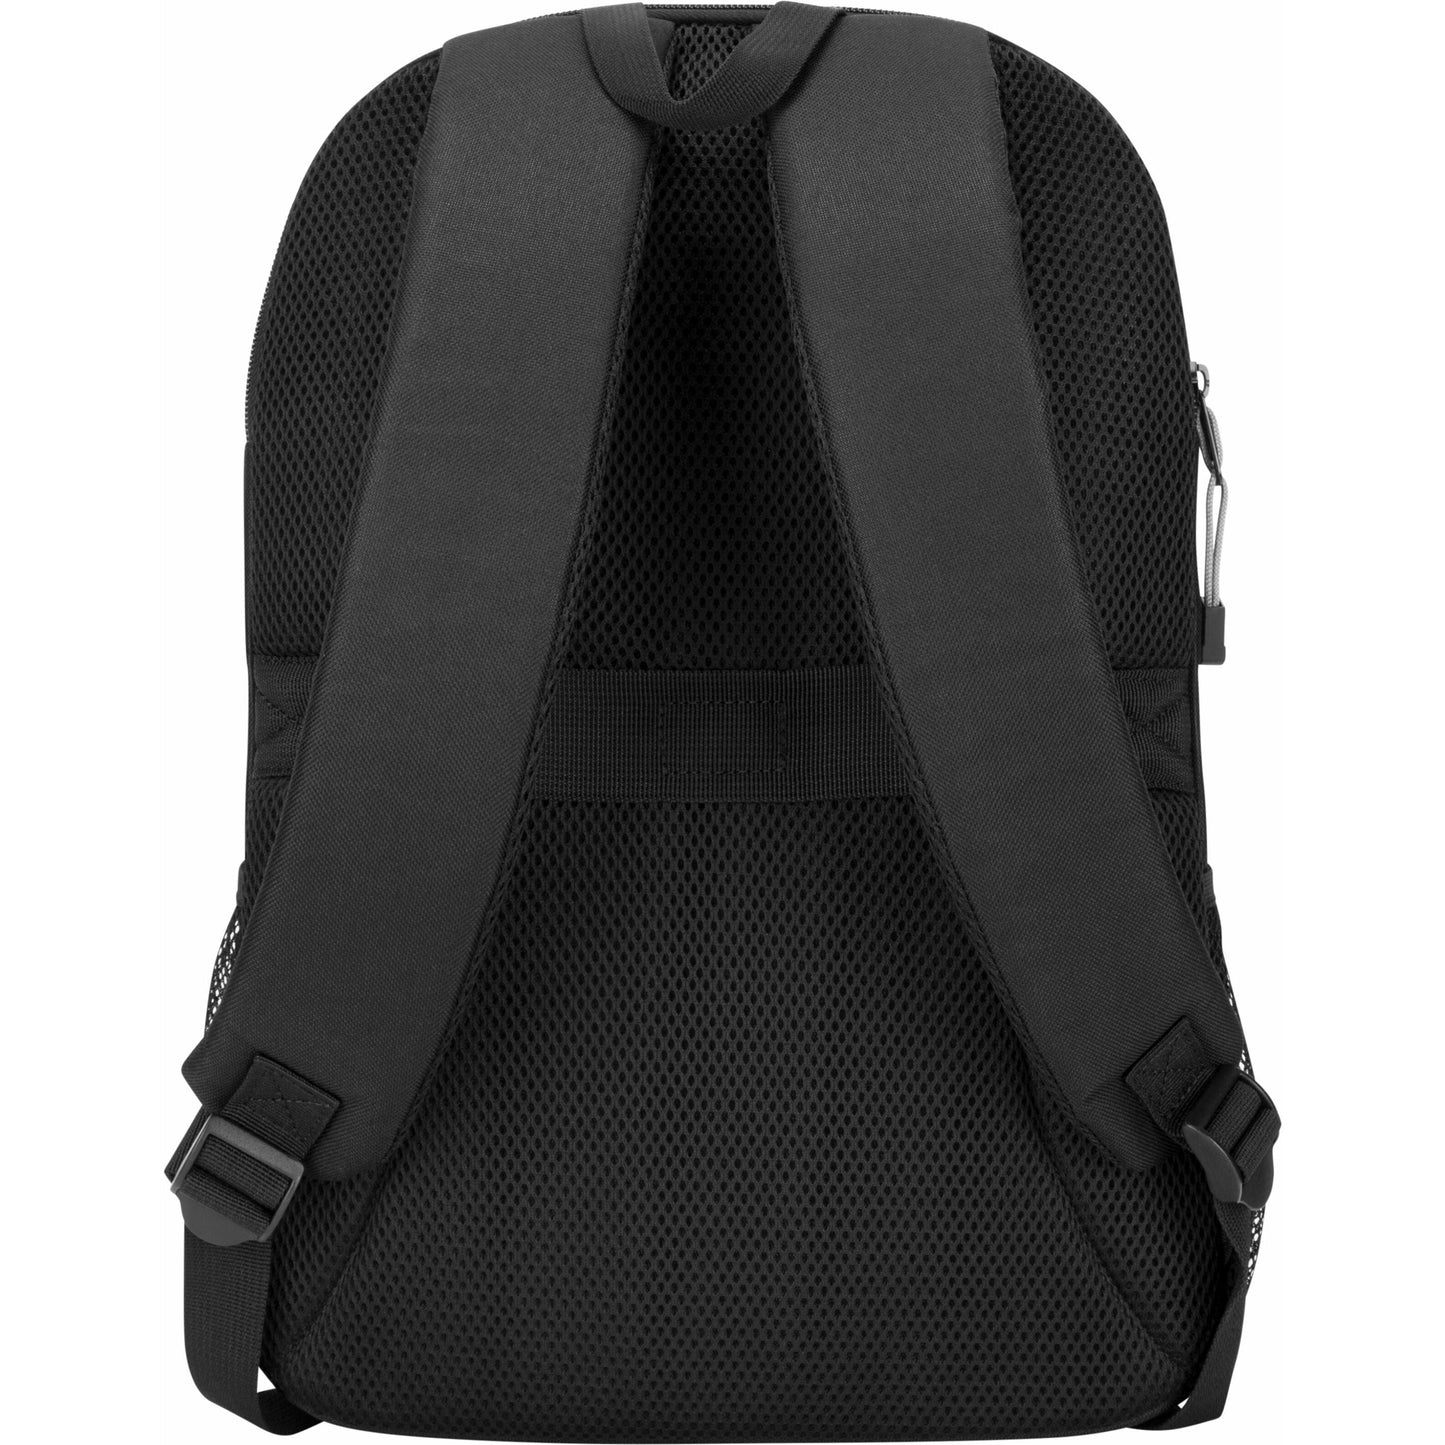 Targus Intellect TSB968GL Carrying Case (Backpack) for 15.6" to 16" Notebook - Black